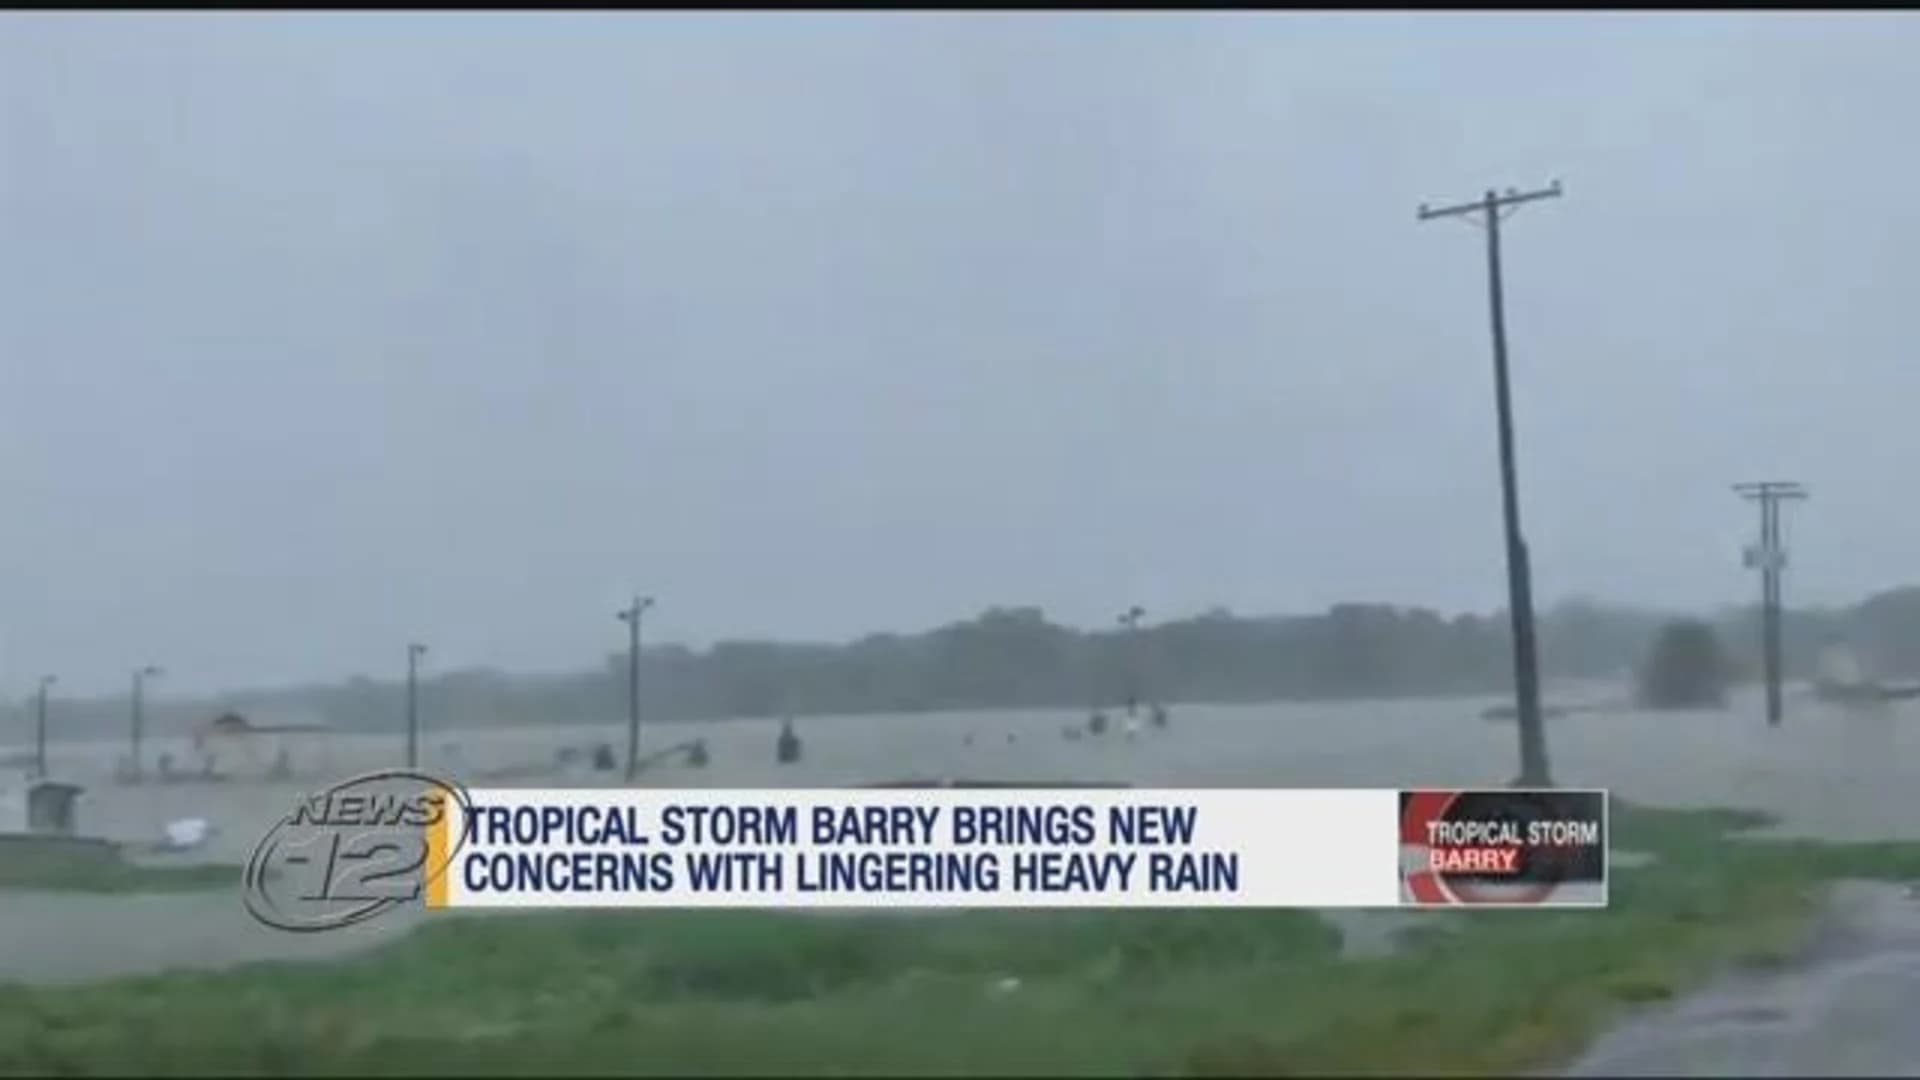 Gulf Coast keeps guard up as Barry continues drenching